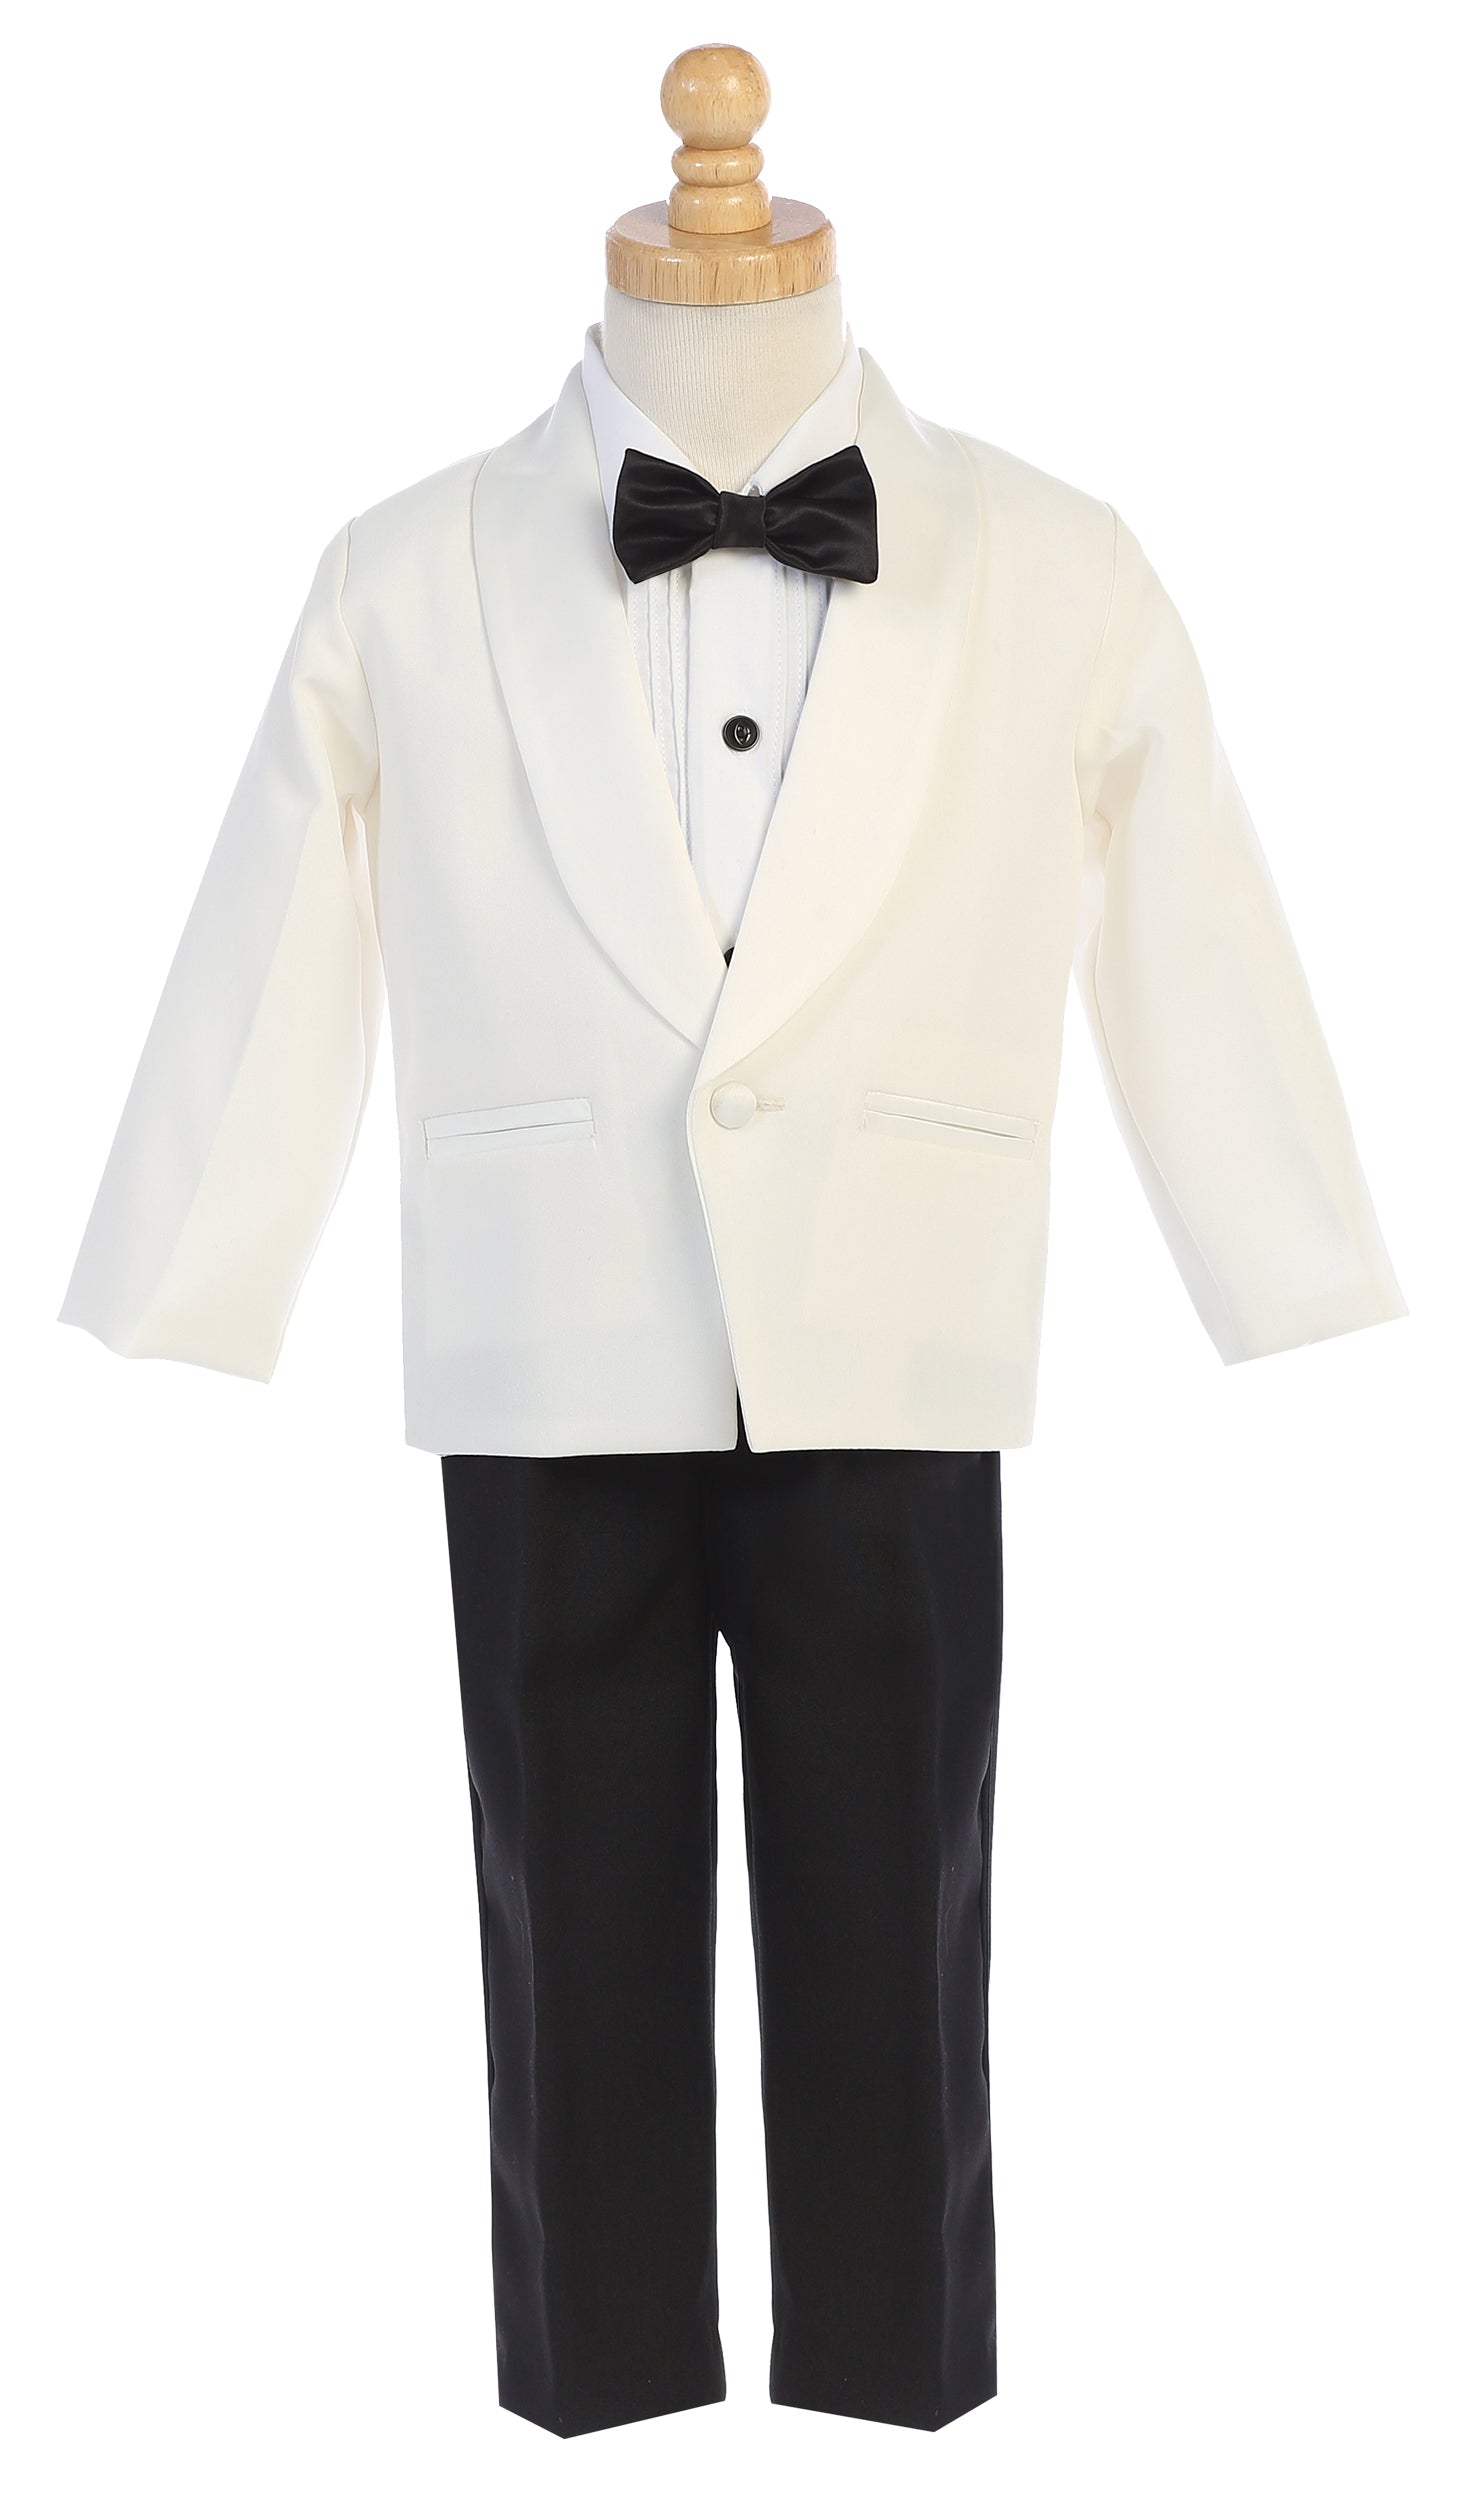 Ring bearer outfit: toddler stealing the spotlight in shawl tuxedo.